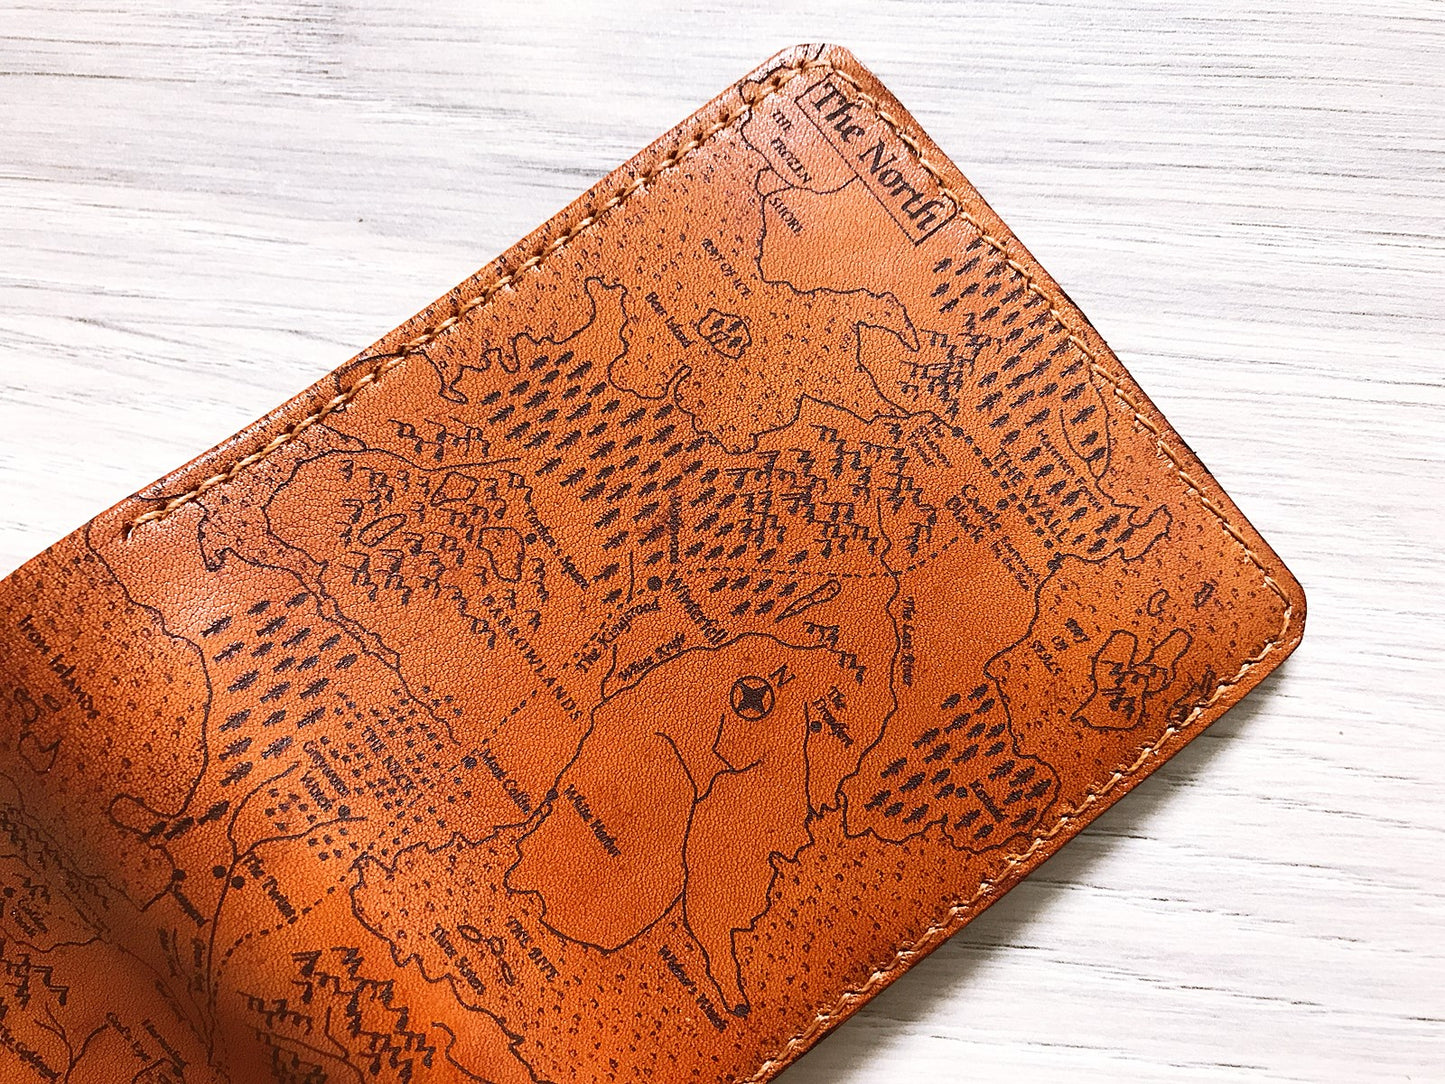 Mayan Corner - Game of Thrones Westeros Essos map men's wallet, men's gift, personalized gift for him, father boyfriend husband anniversary present